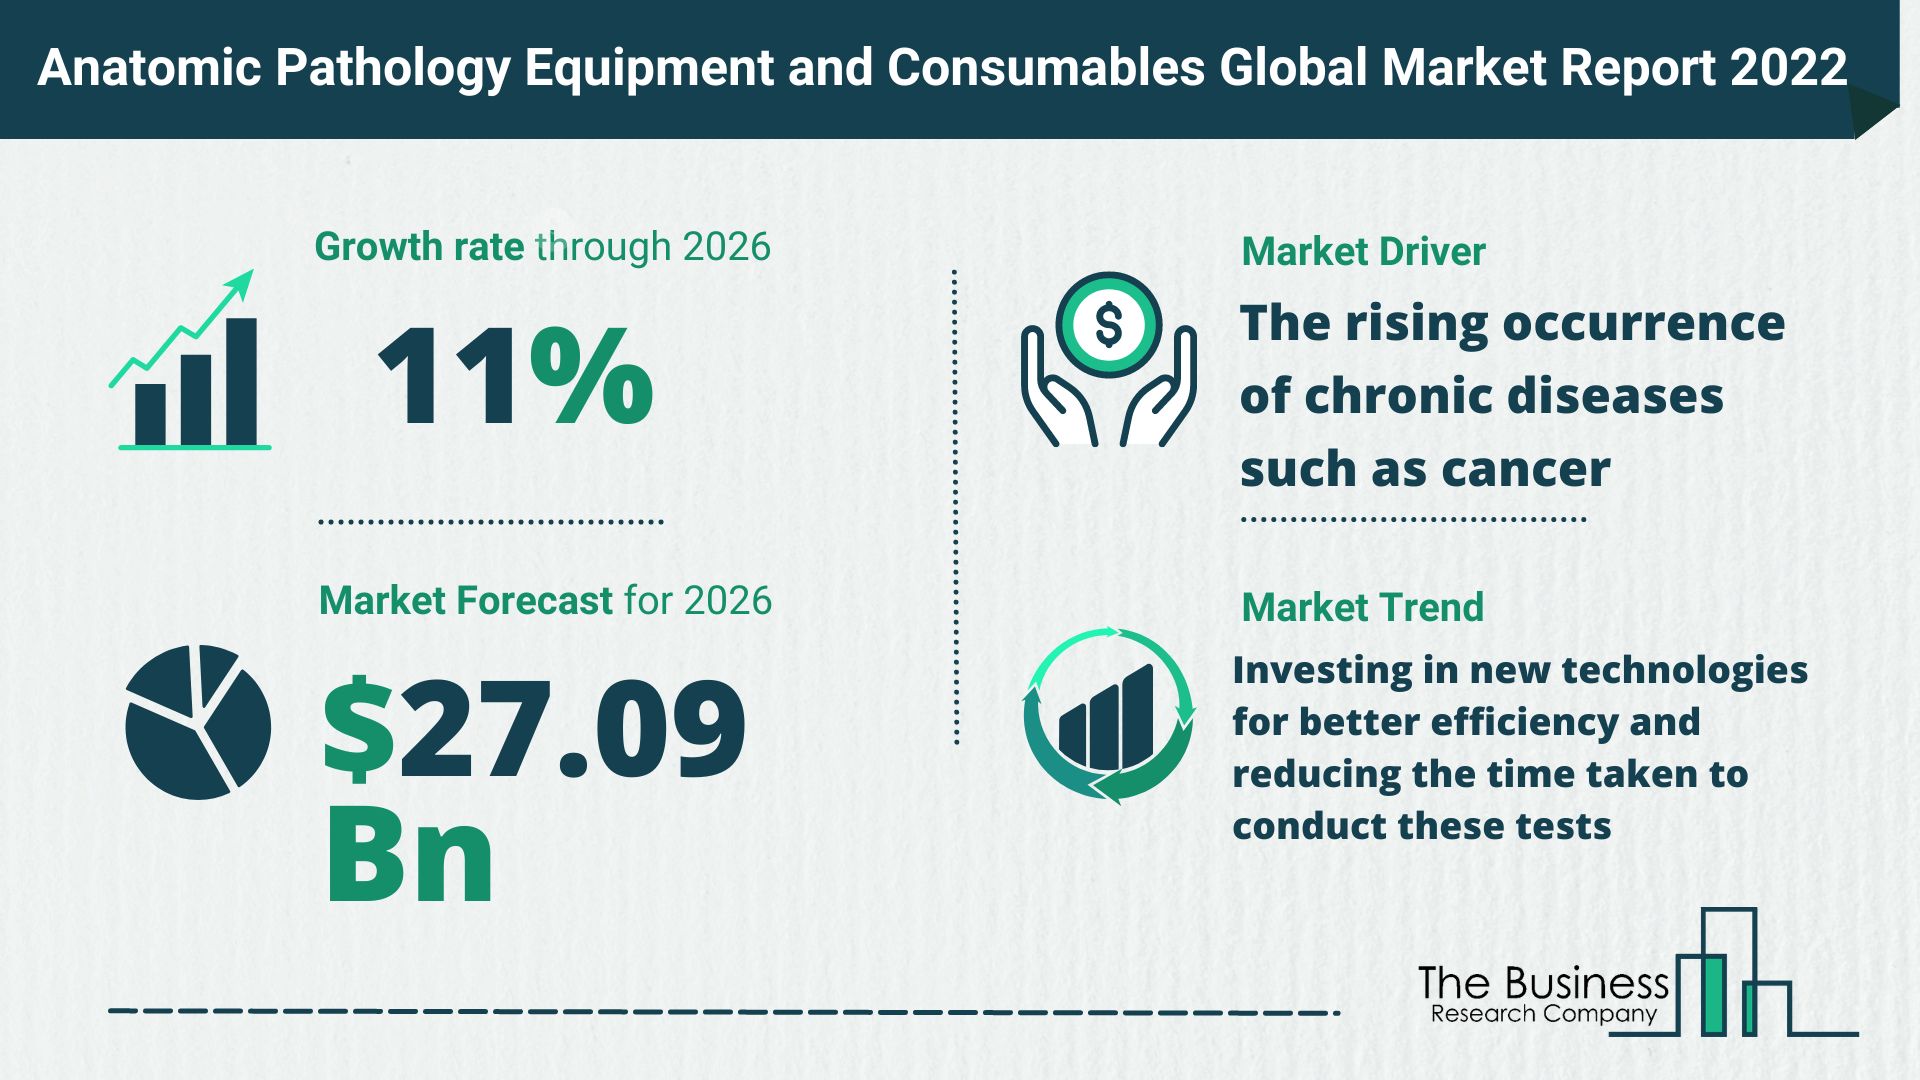 What Is The Anatomic Pathology Equipment and Consumables Market Overview In 2022?